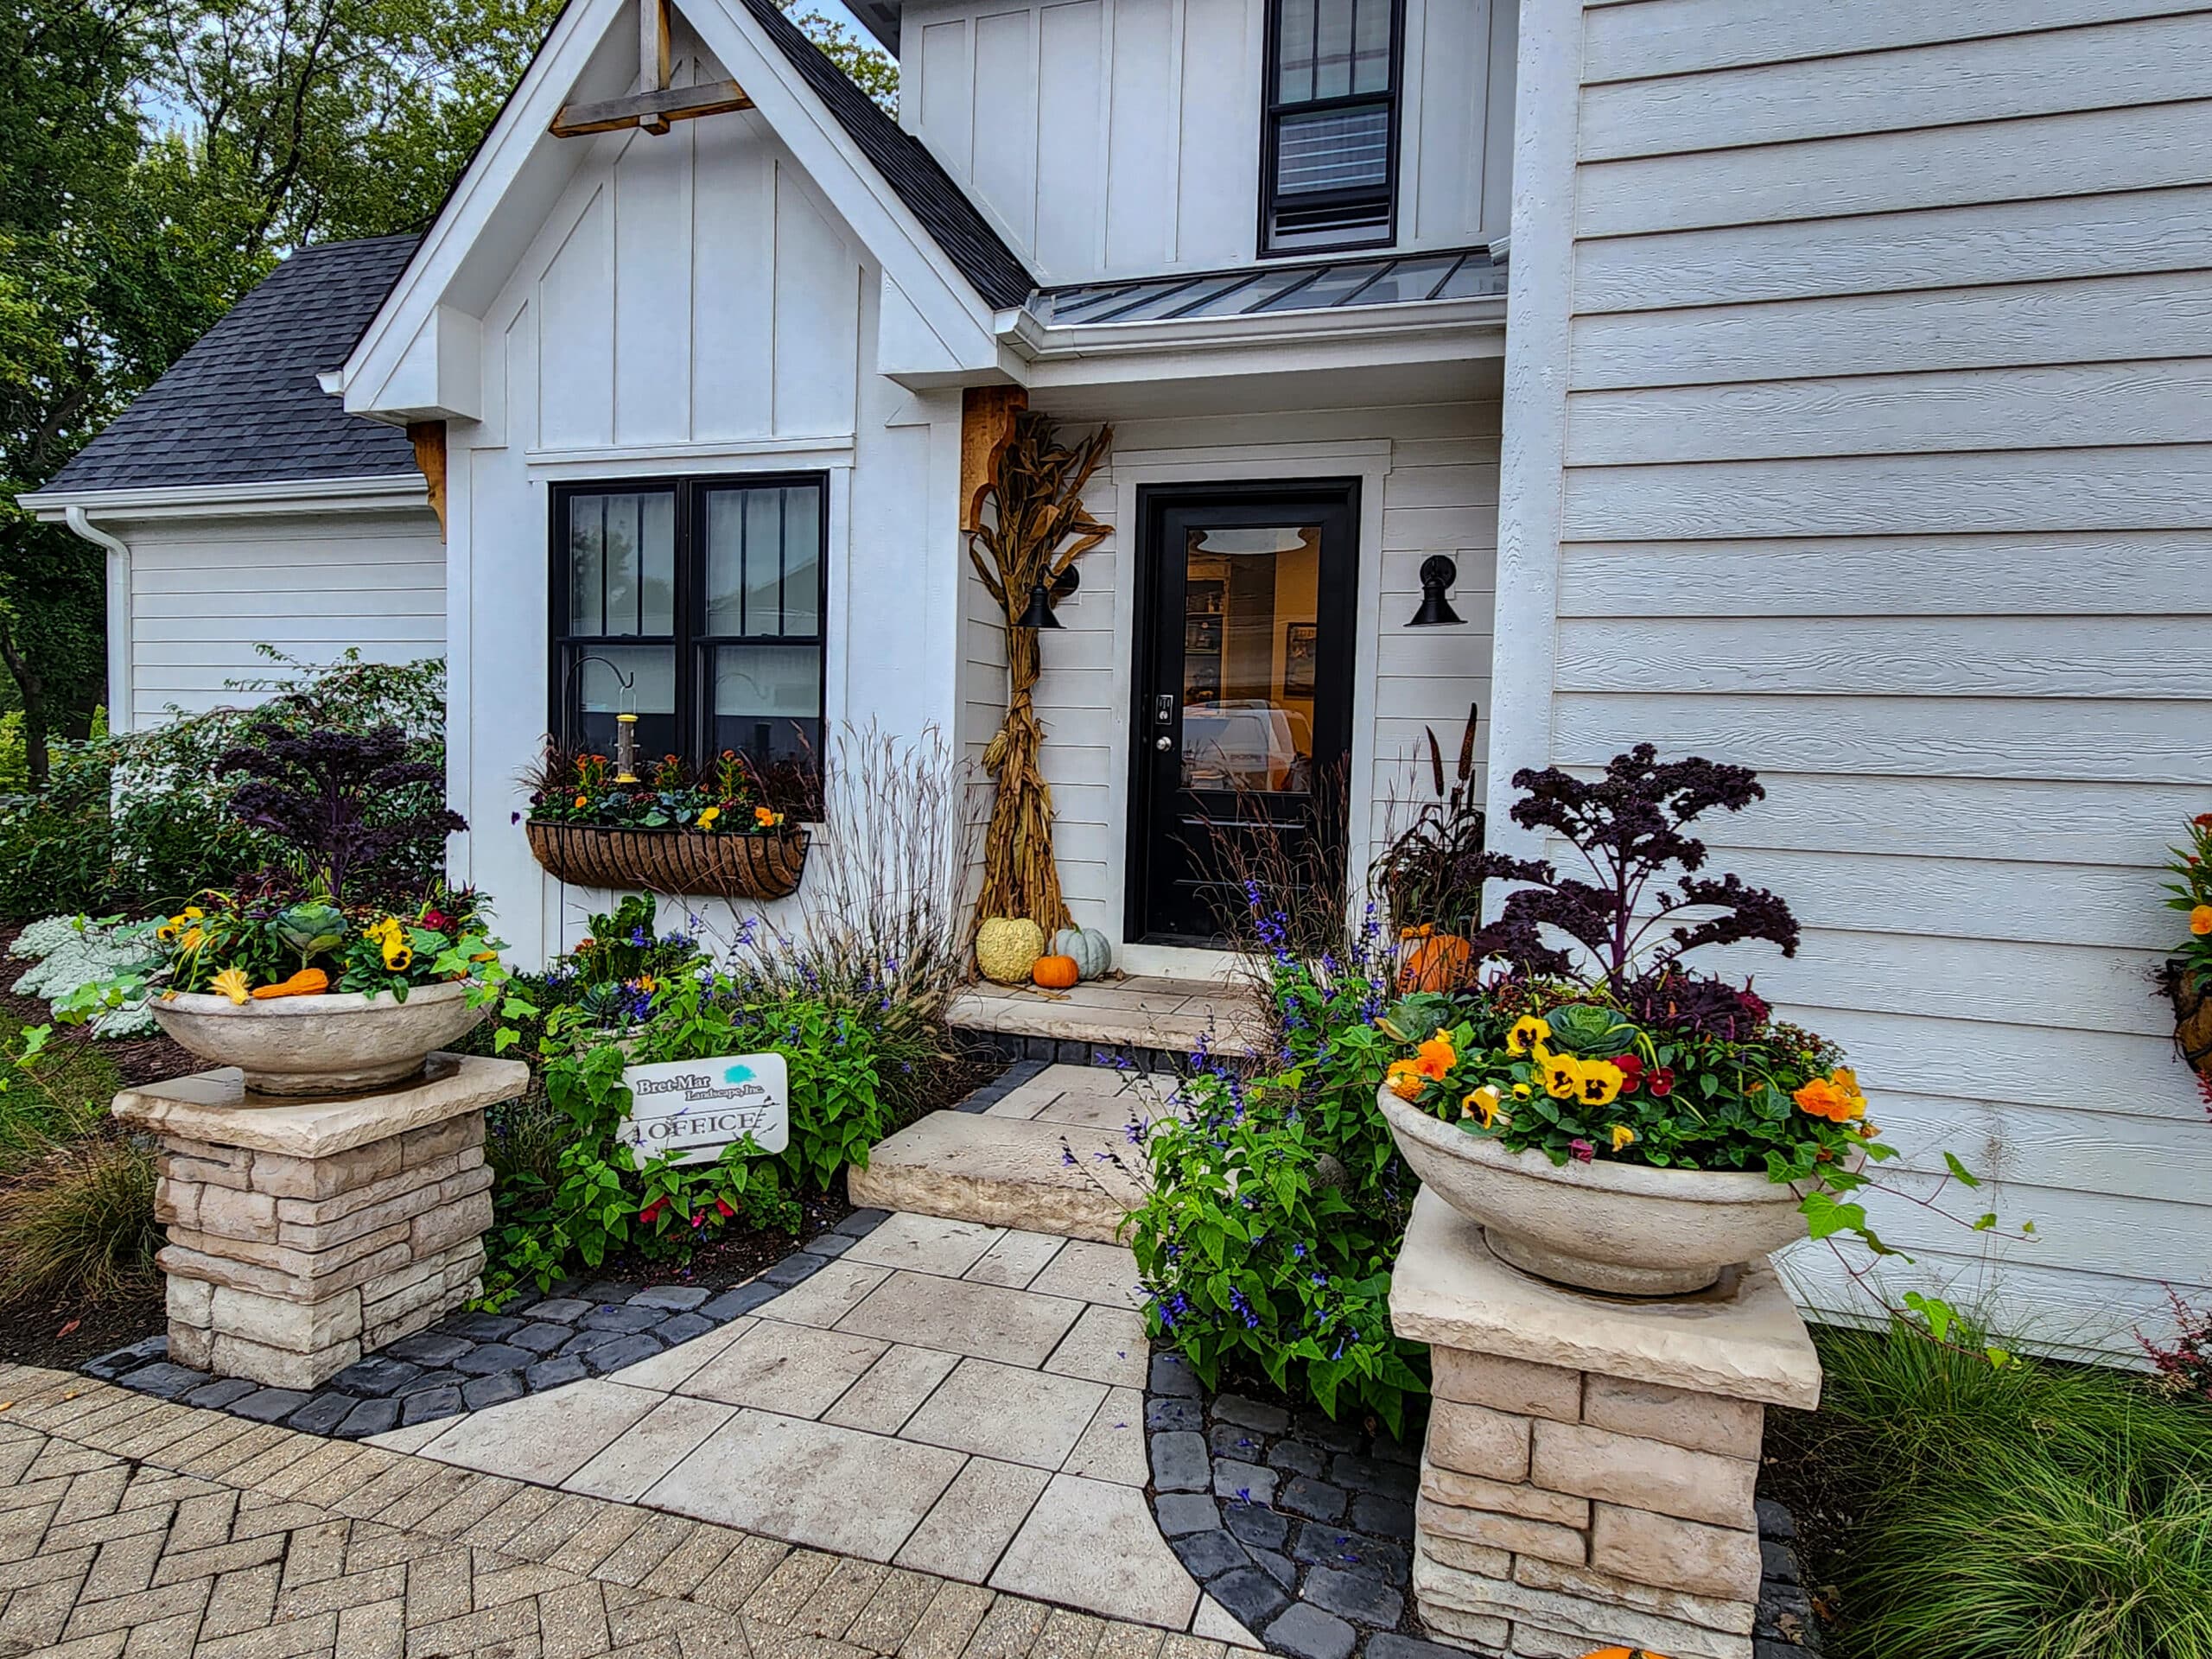 hardscaping services in homer glen illinois - brick front porch entry way by bretmar landscaping